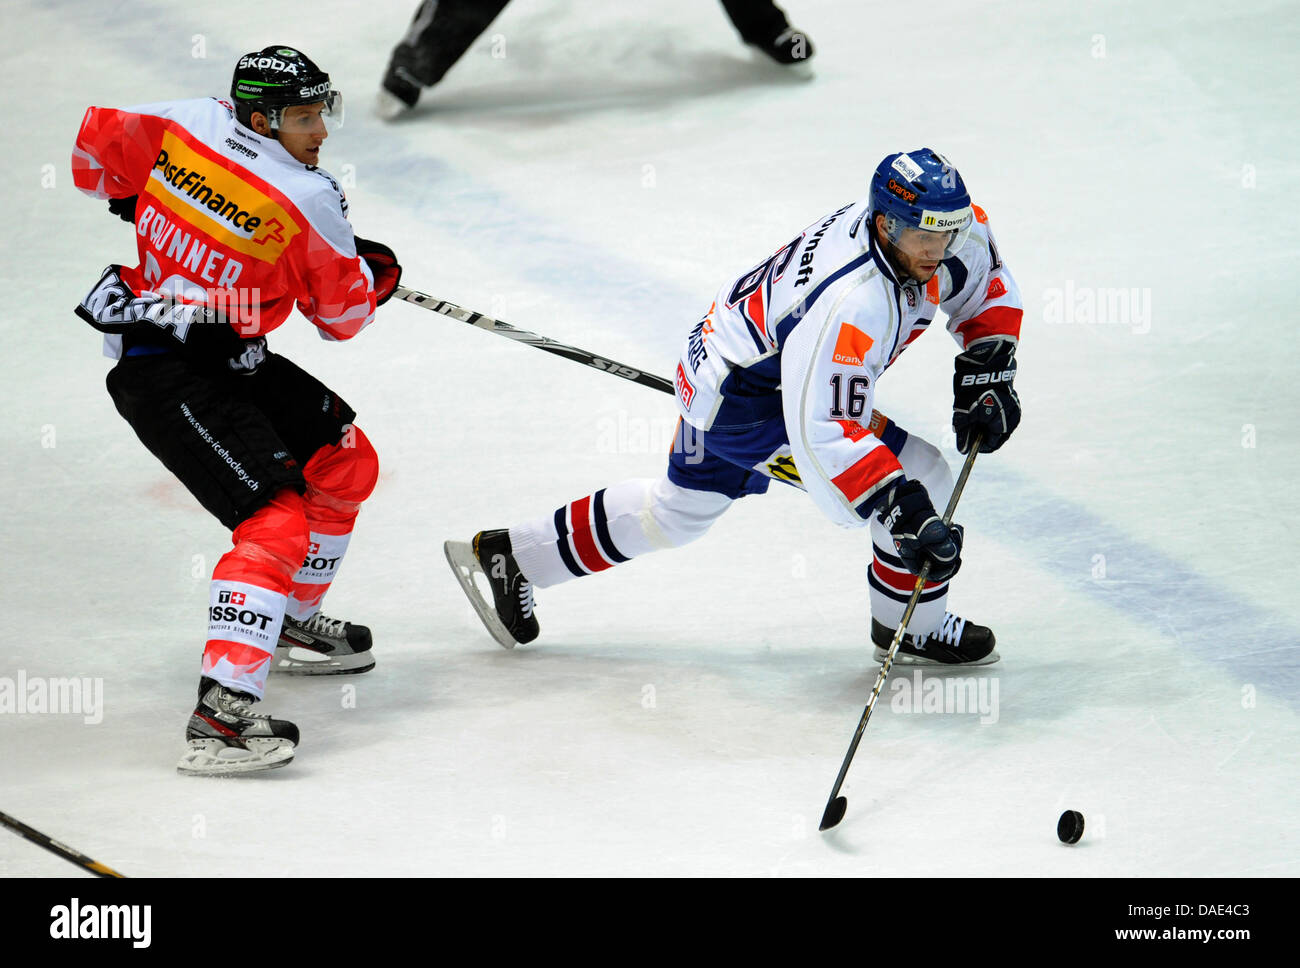 Slovakia's Roman Kukumberg (R) vies for the puck with Switzerland's Damien Brunner during the Deutschland Cup ice hockey match between Slovakia and Switzerland at the Olympic Hall in Munich, Germany, 13 November 2011. Photo: Andreas Gebert Stock Photo